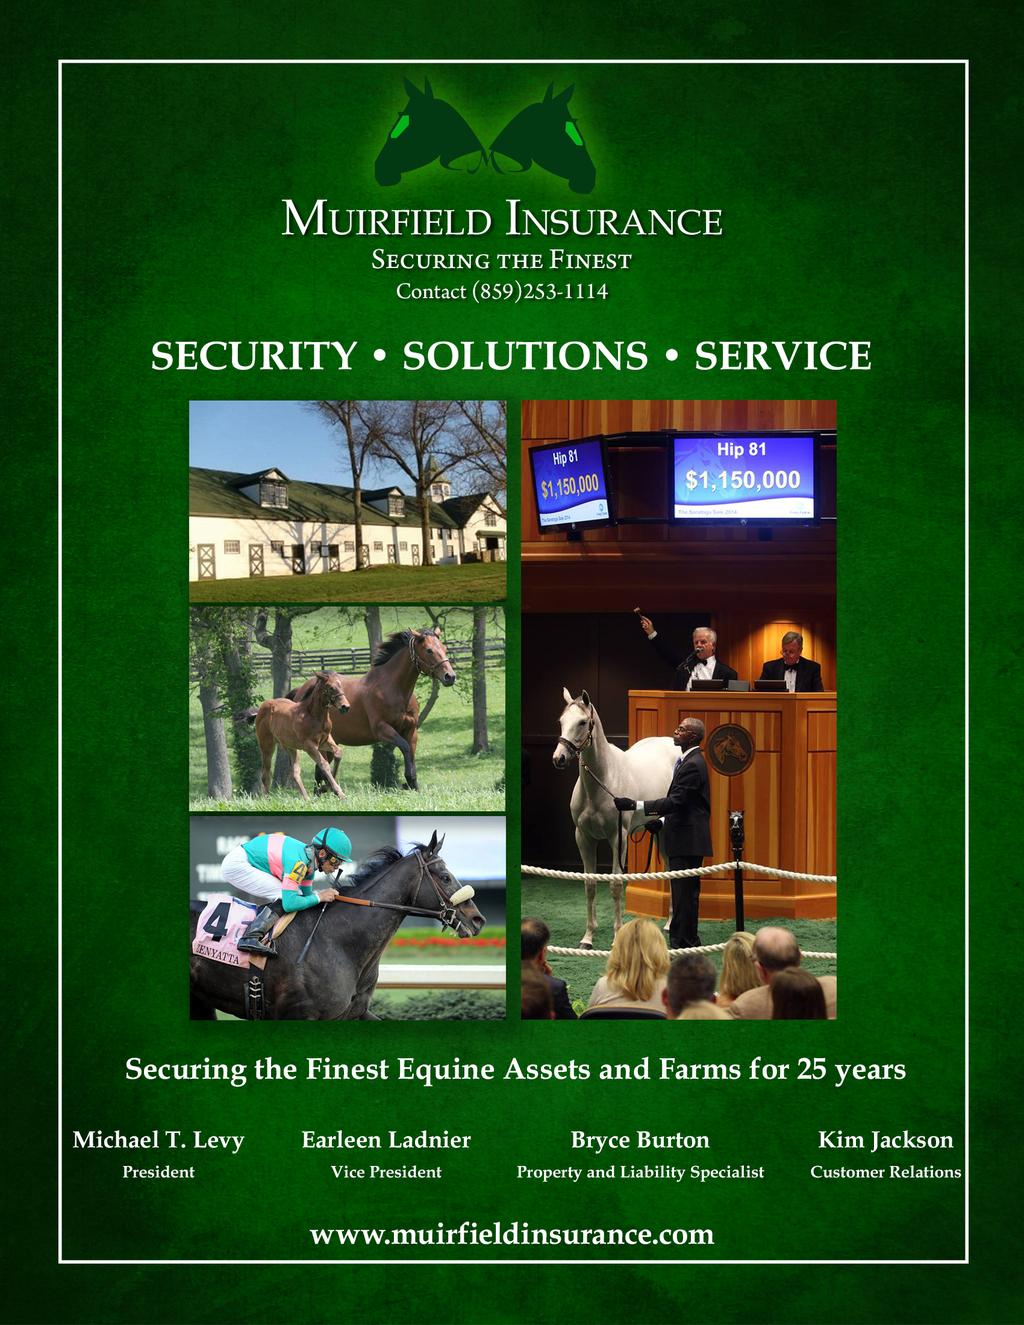 A private purchase falls within the same category, as the private purchase price will determine the sum insured value of the horse.